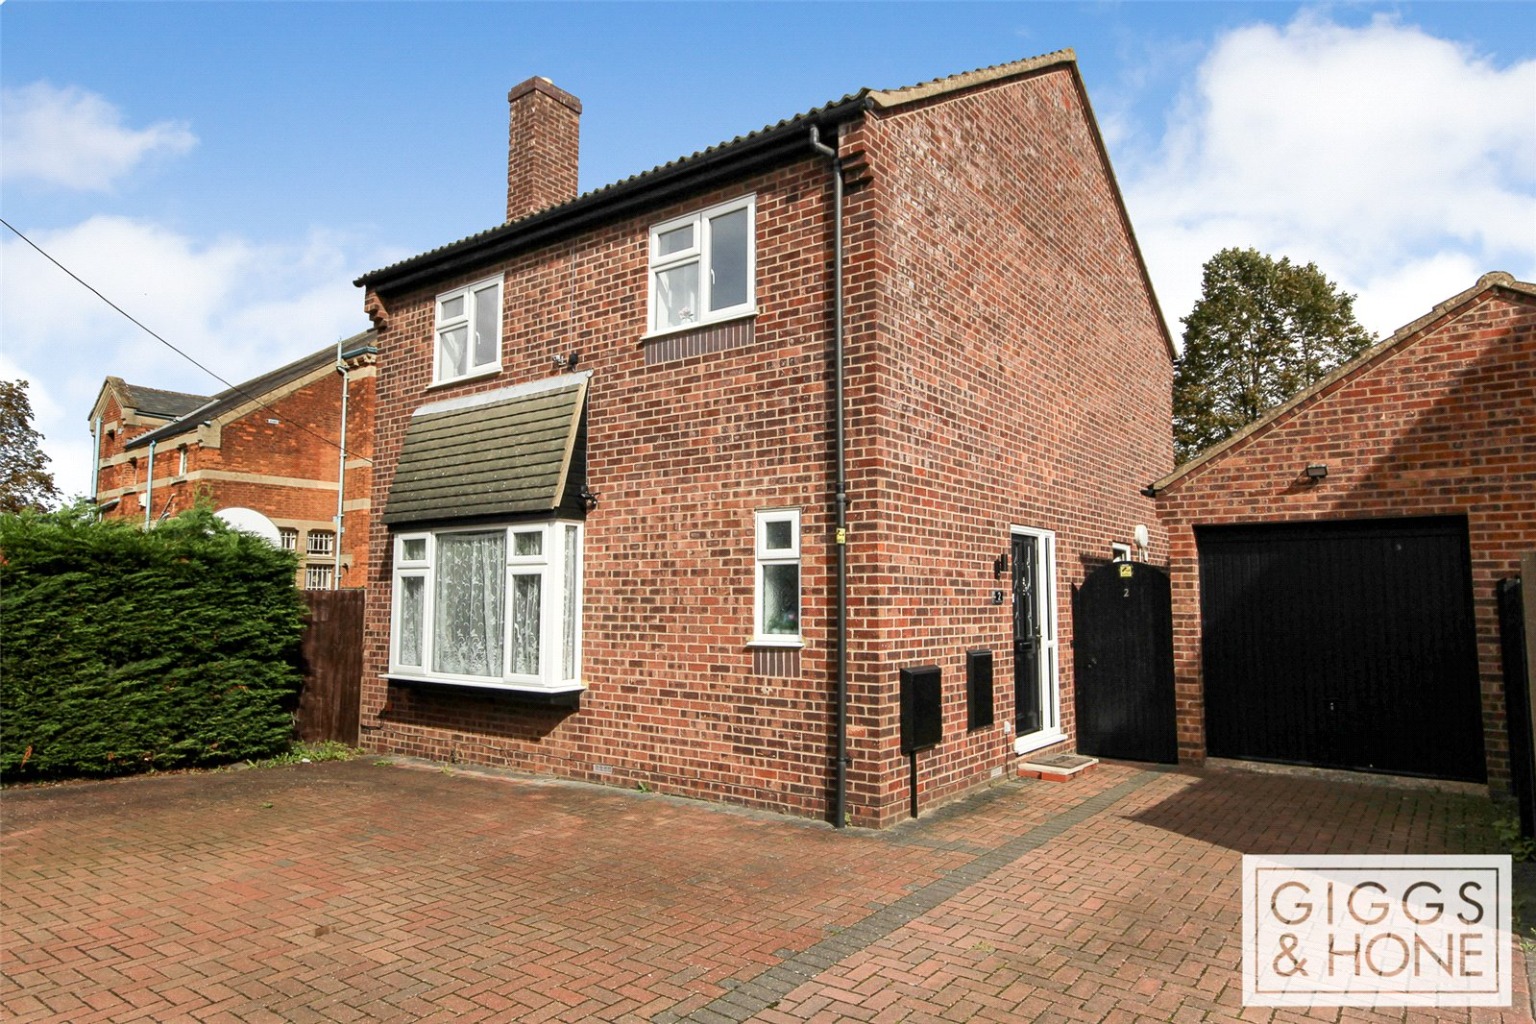 Well presented spacious four bedroom home located on Walcourt Road in Kempston.